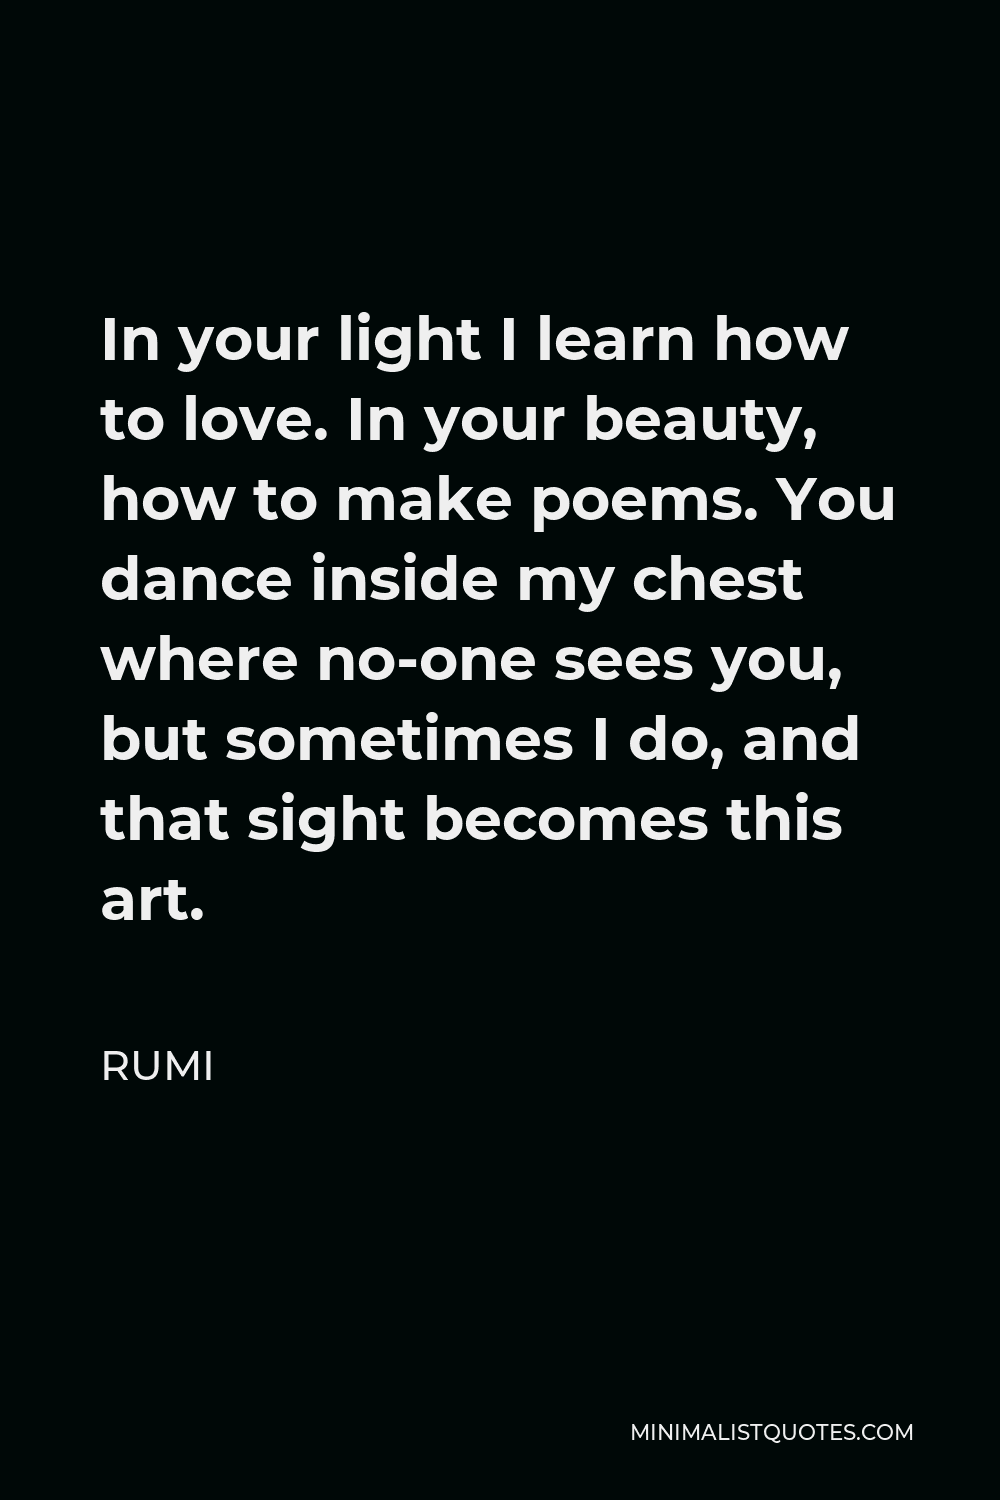 Rumi Quote - In your light I learn how to love. In your beauty, how to make poems. You dance inside my chest where no-one sees you, but sometimes I do, and that sight becomes this art.